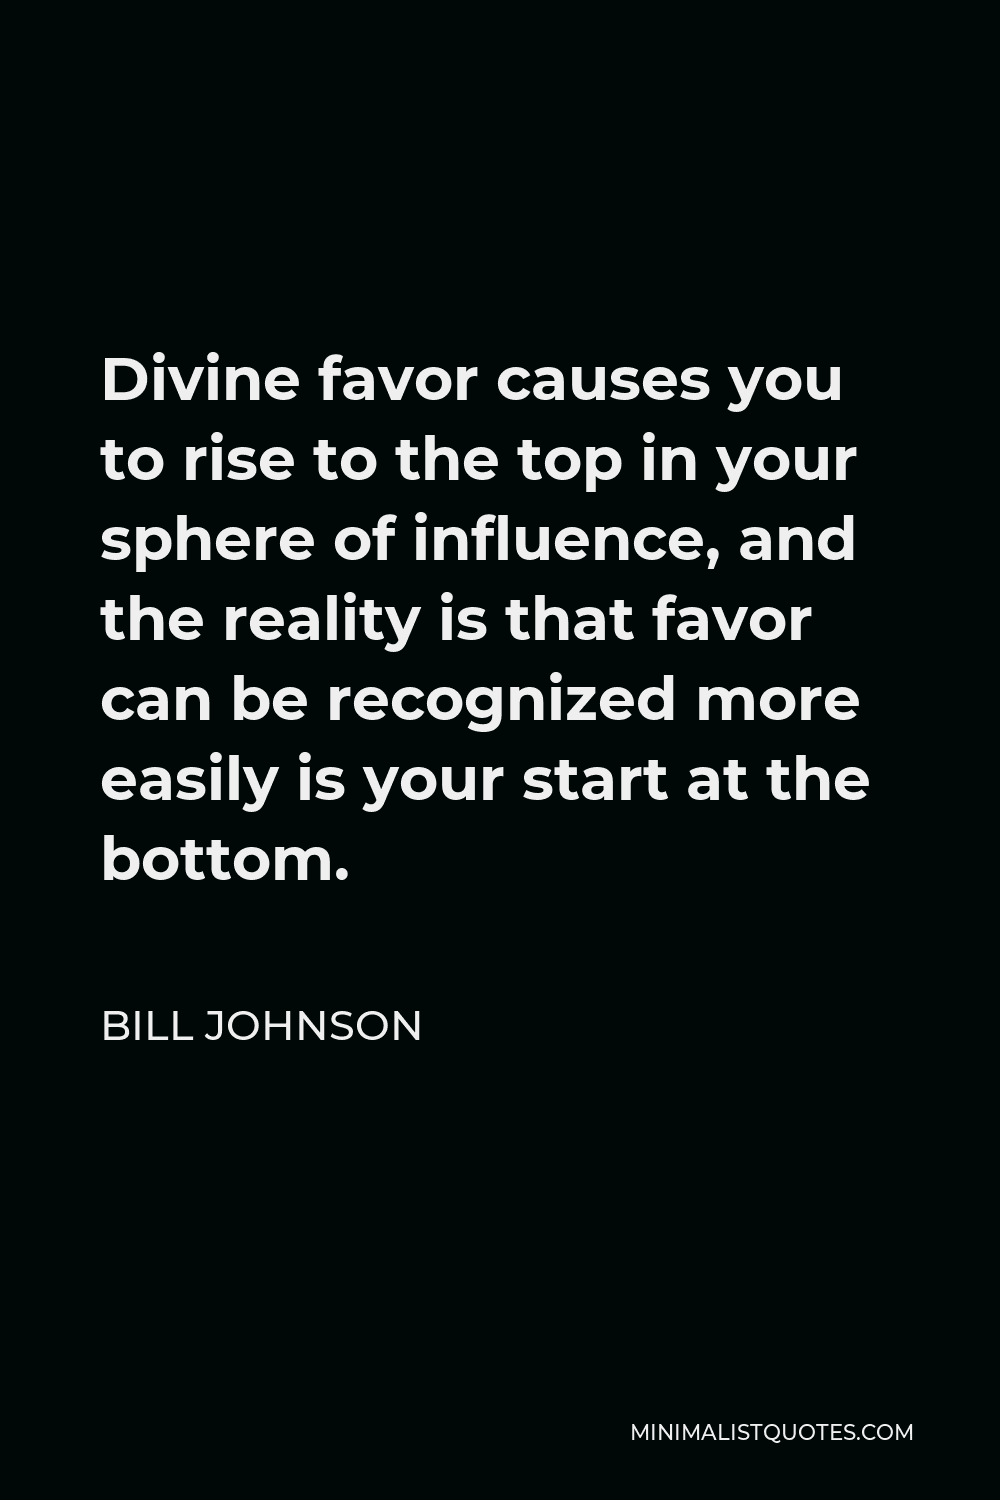 Bill Johnson Quote - Divine favor causes you to rise to the top in your sphere of influence, and the reality is that favor can be recognized more easily is your start at the bottom.